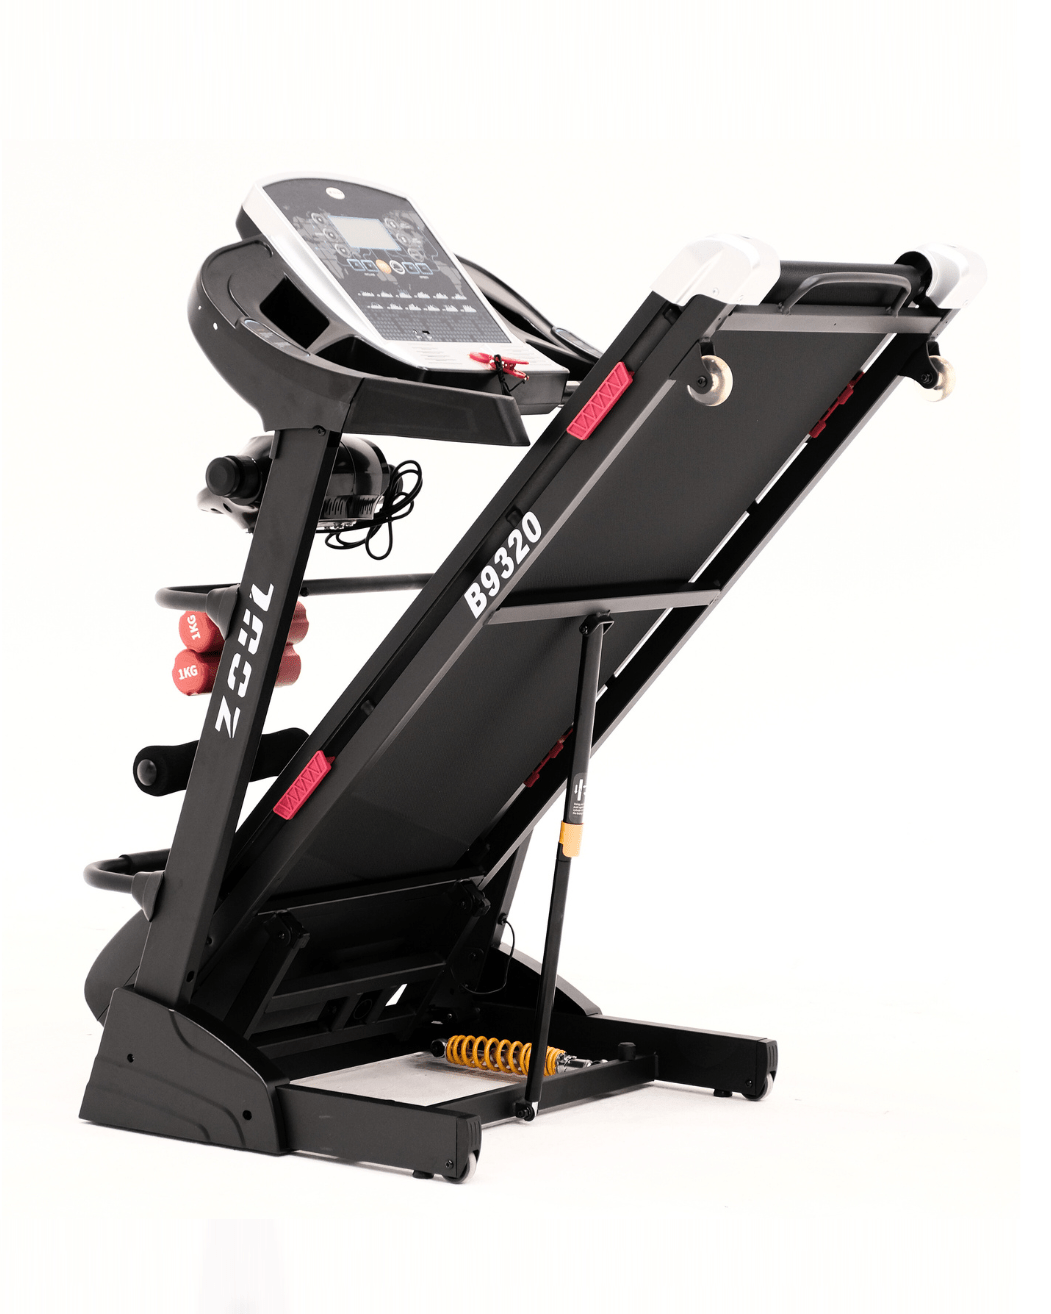 Zoul Fitness B9320 (3.5 HP Peak Motor) Digital Treadmill for Home Use | Automatic Inclination - zoulfitness